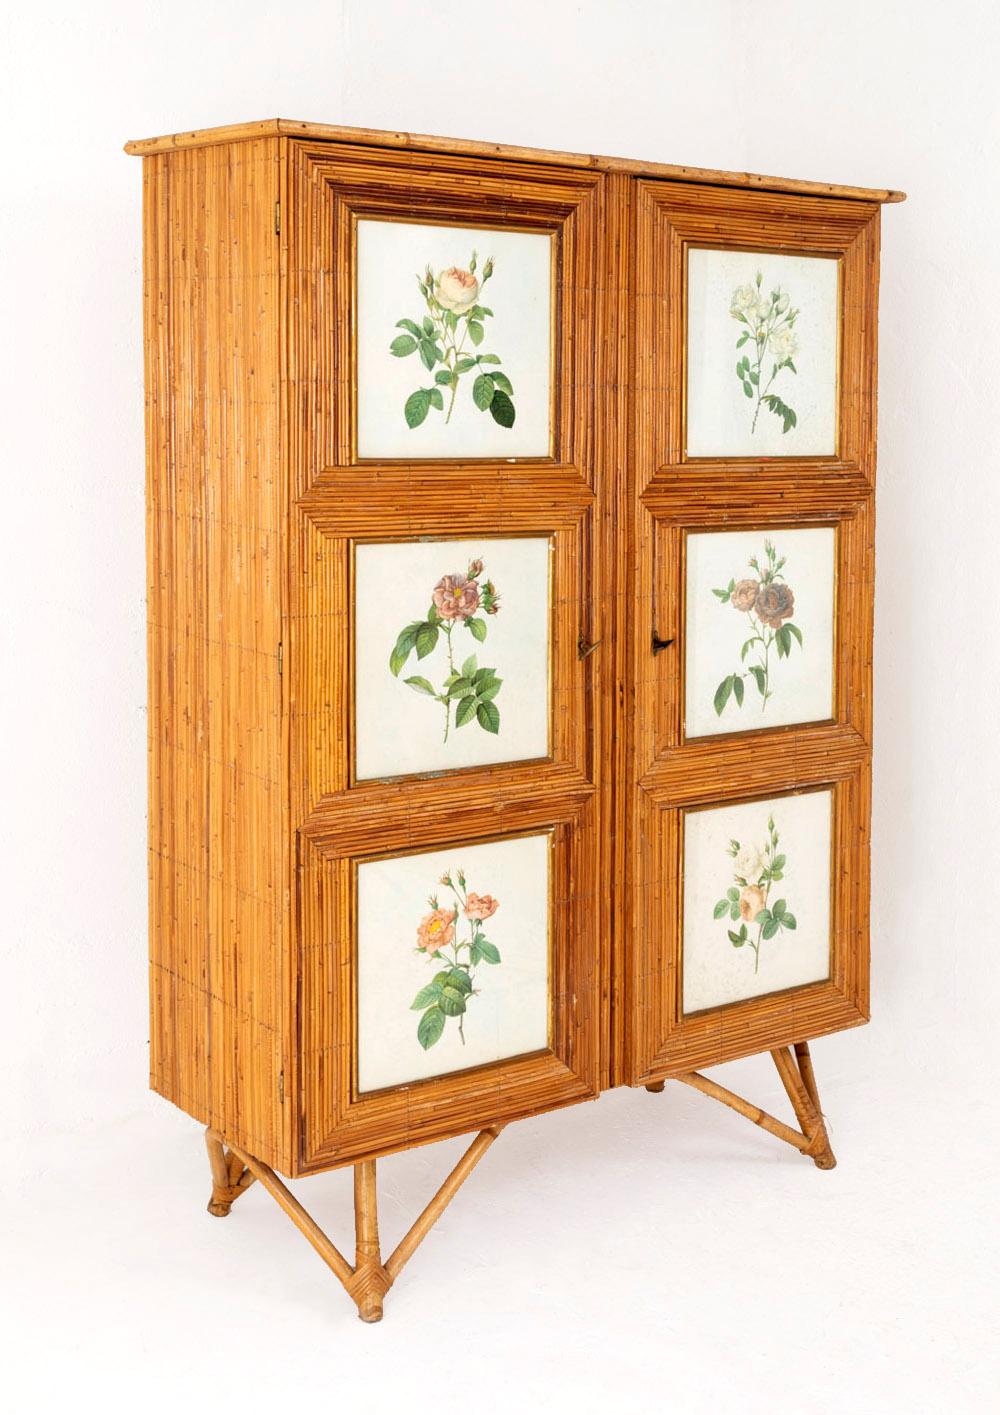 Armoire covered with rattan. Opening by two drop leaves, each one is adorned with white paper engravings under glass representing different colored roses in the style of Pierre-Joseph Redouté. Rattan sticks tripod legs on each angle.
Furniture